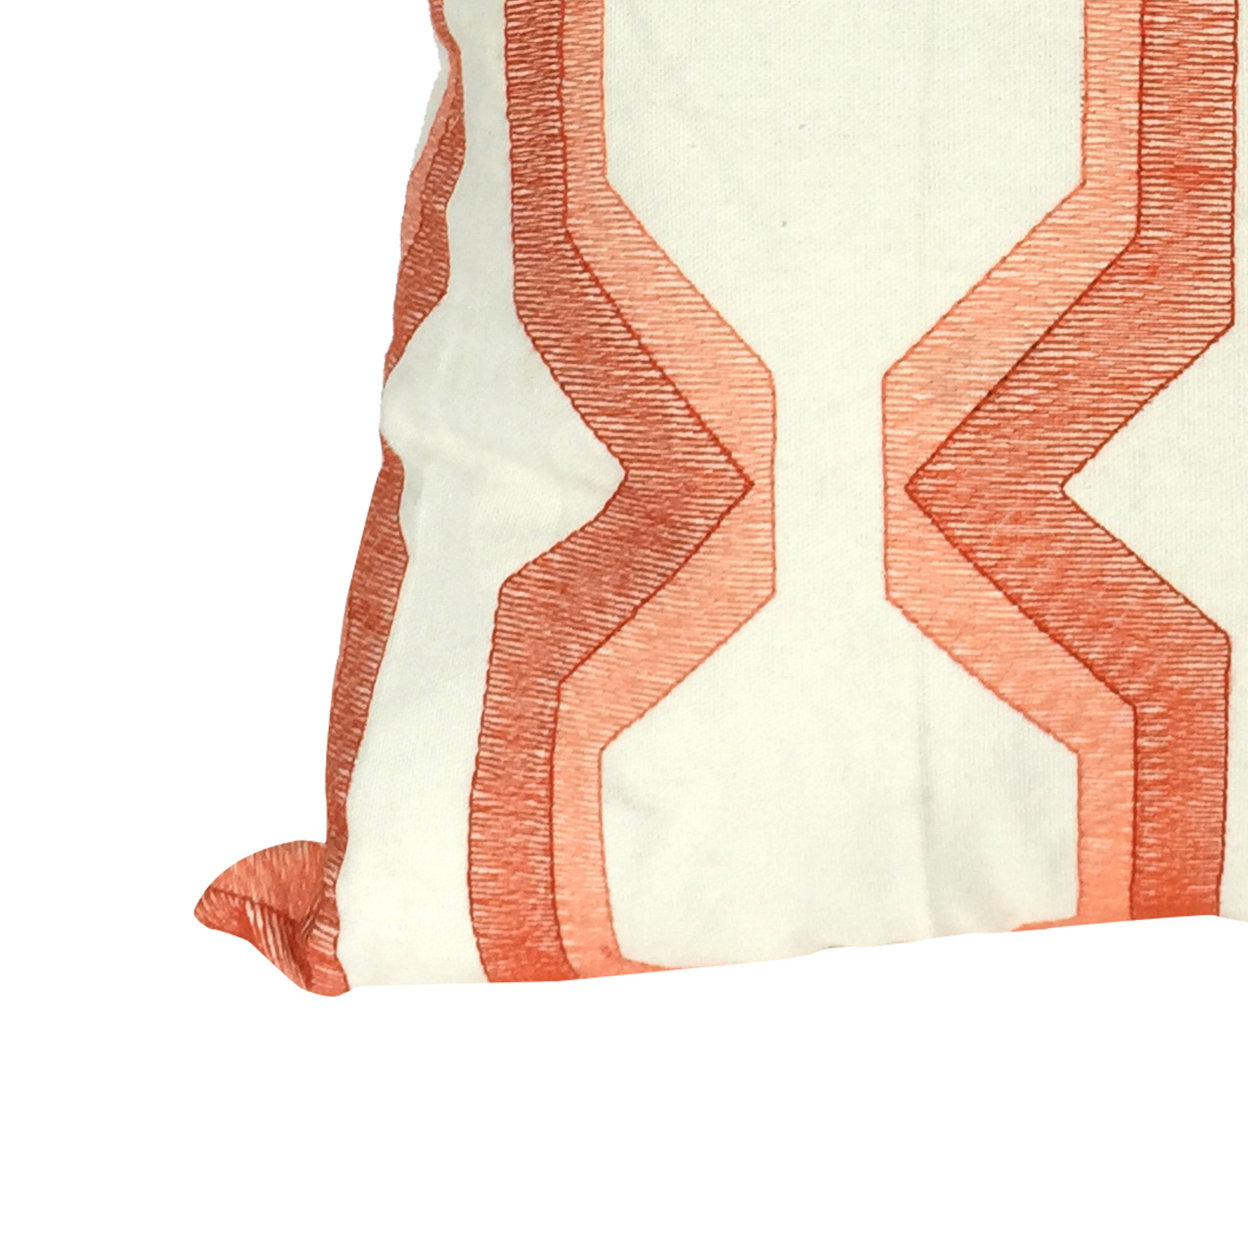 Contemporary Cotton Pillow With Geometric Embroidery, Red And White- Saltoro Sherpi